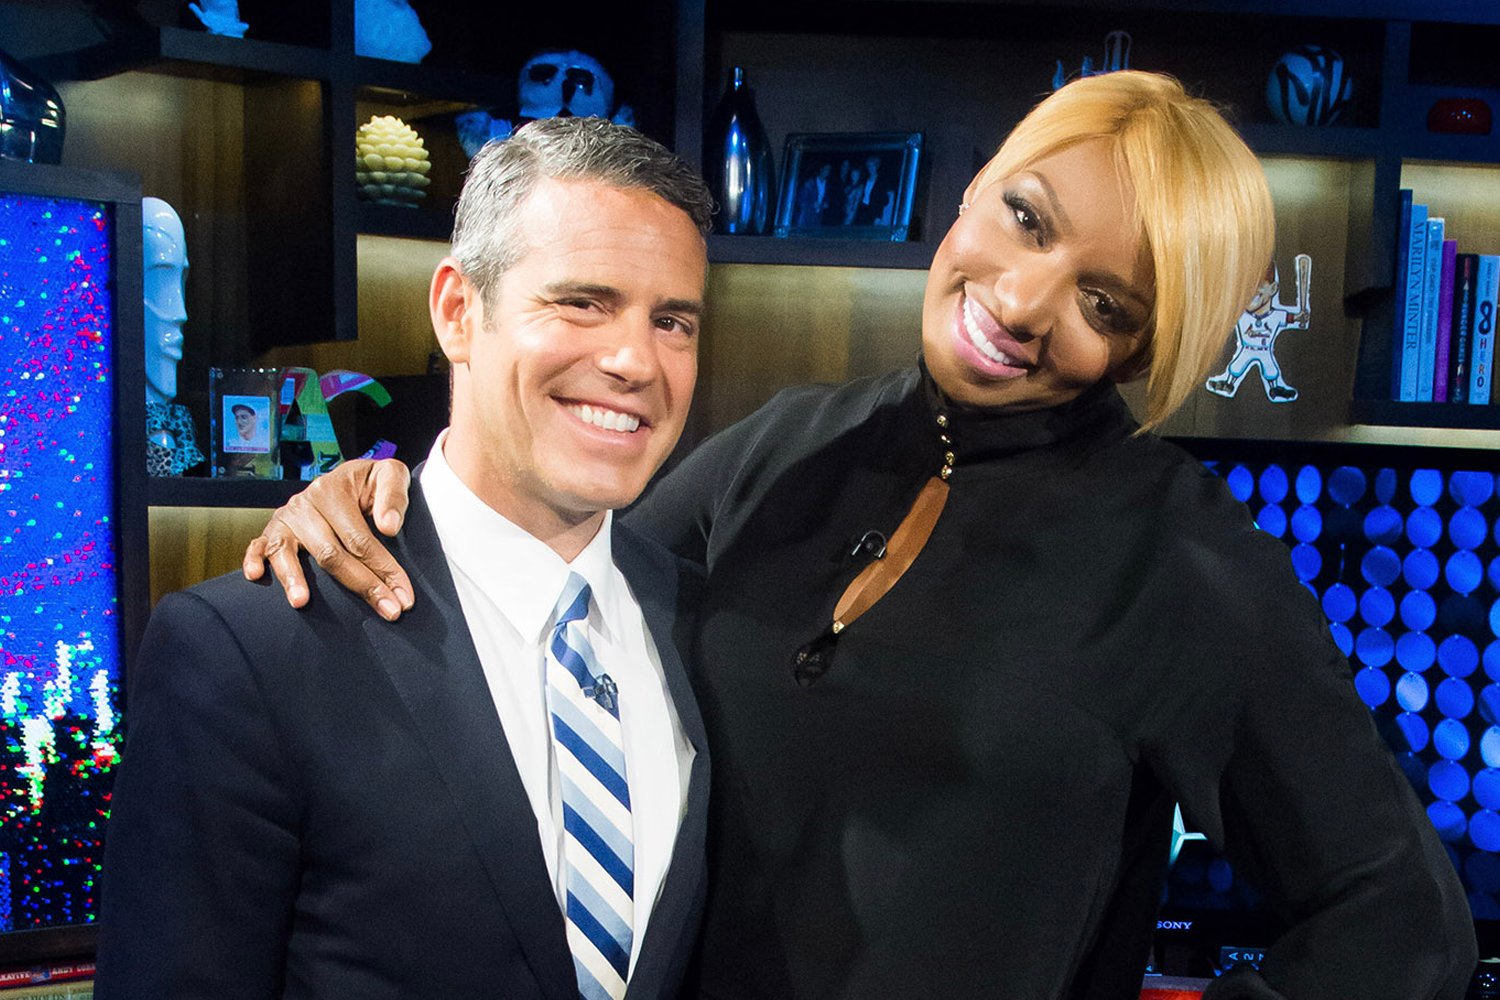 Andy Cohen and Nene Leakes